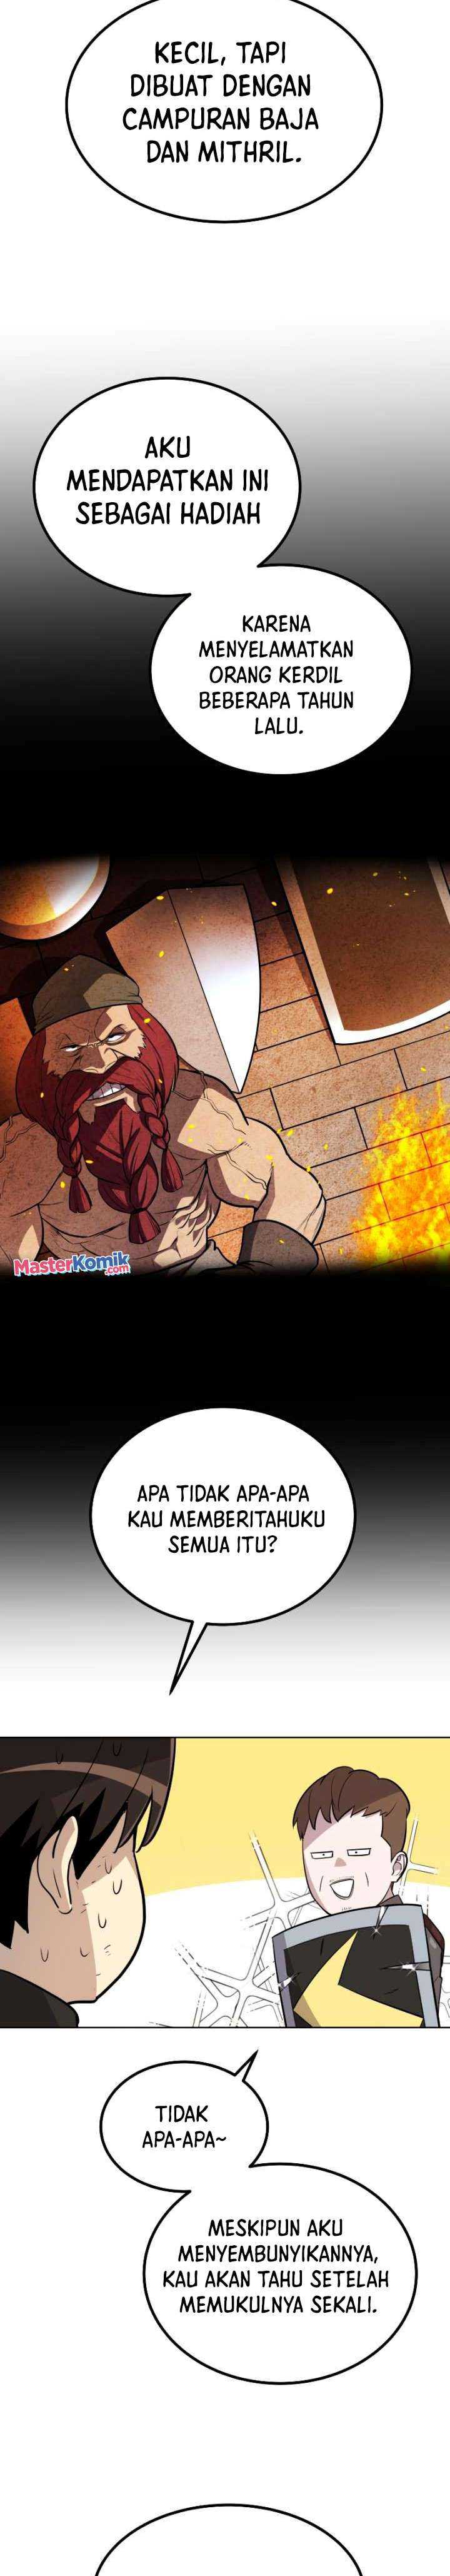 Overpowered Sword Chapter 51